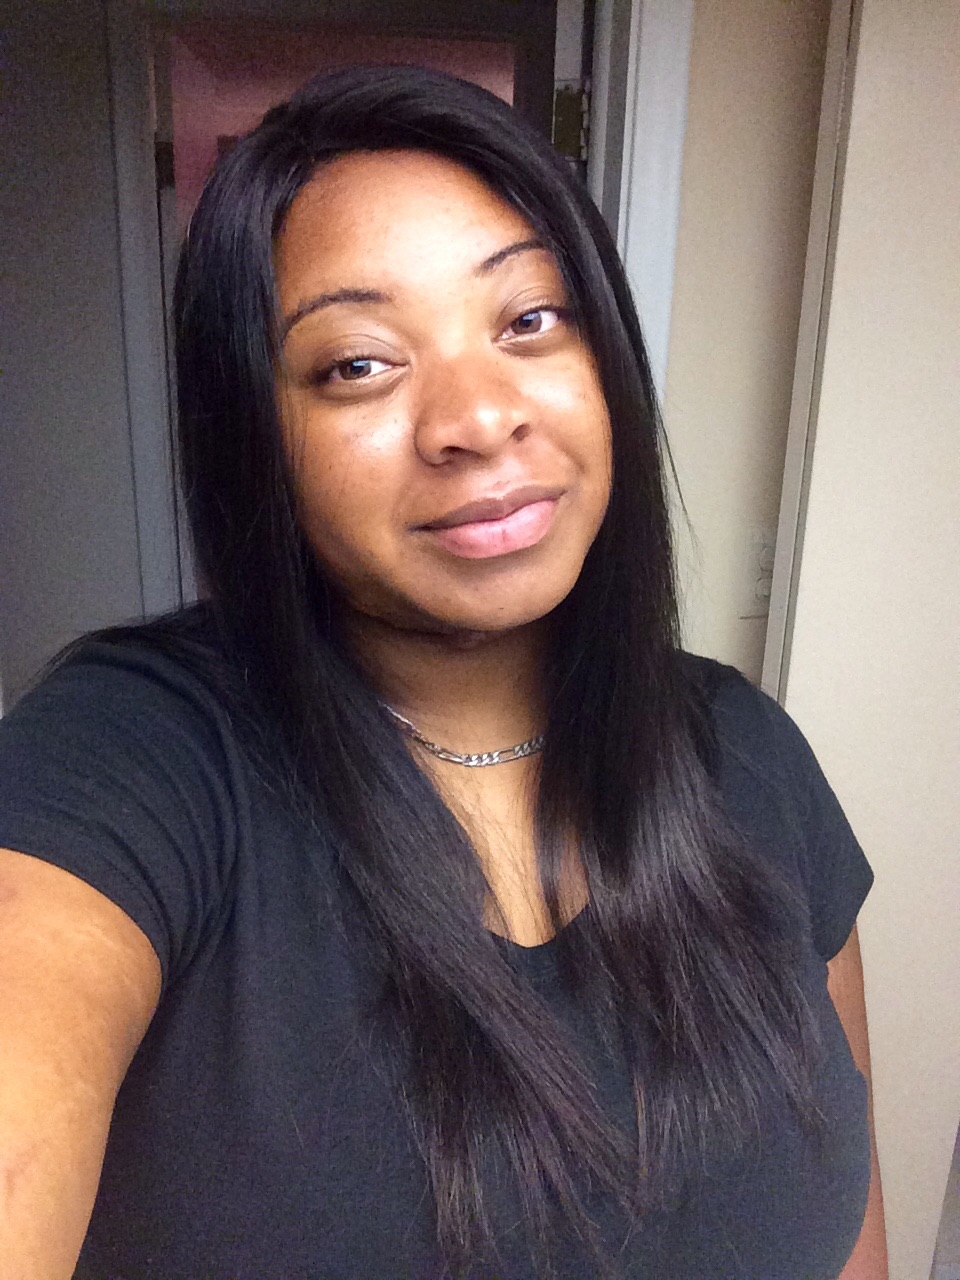 Best lace wig on 08/04/15